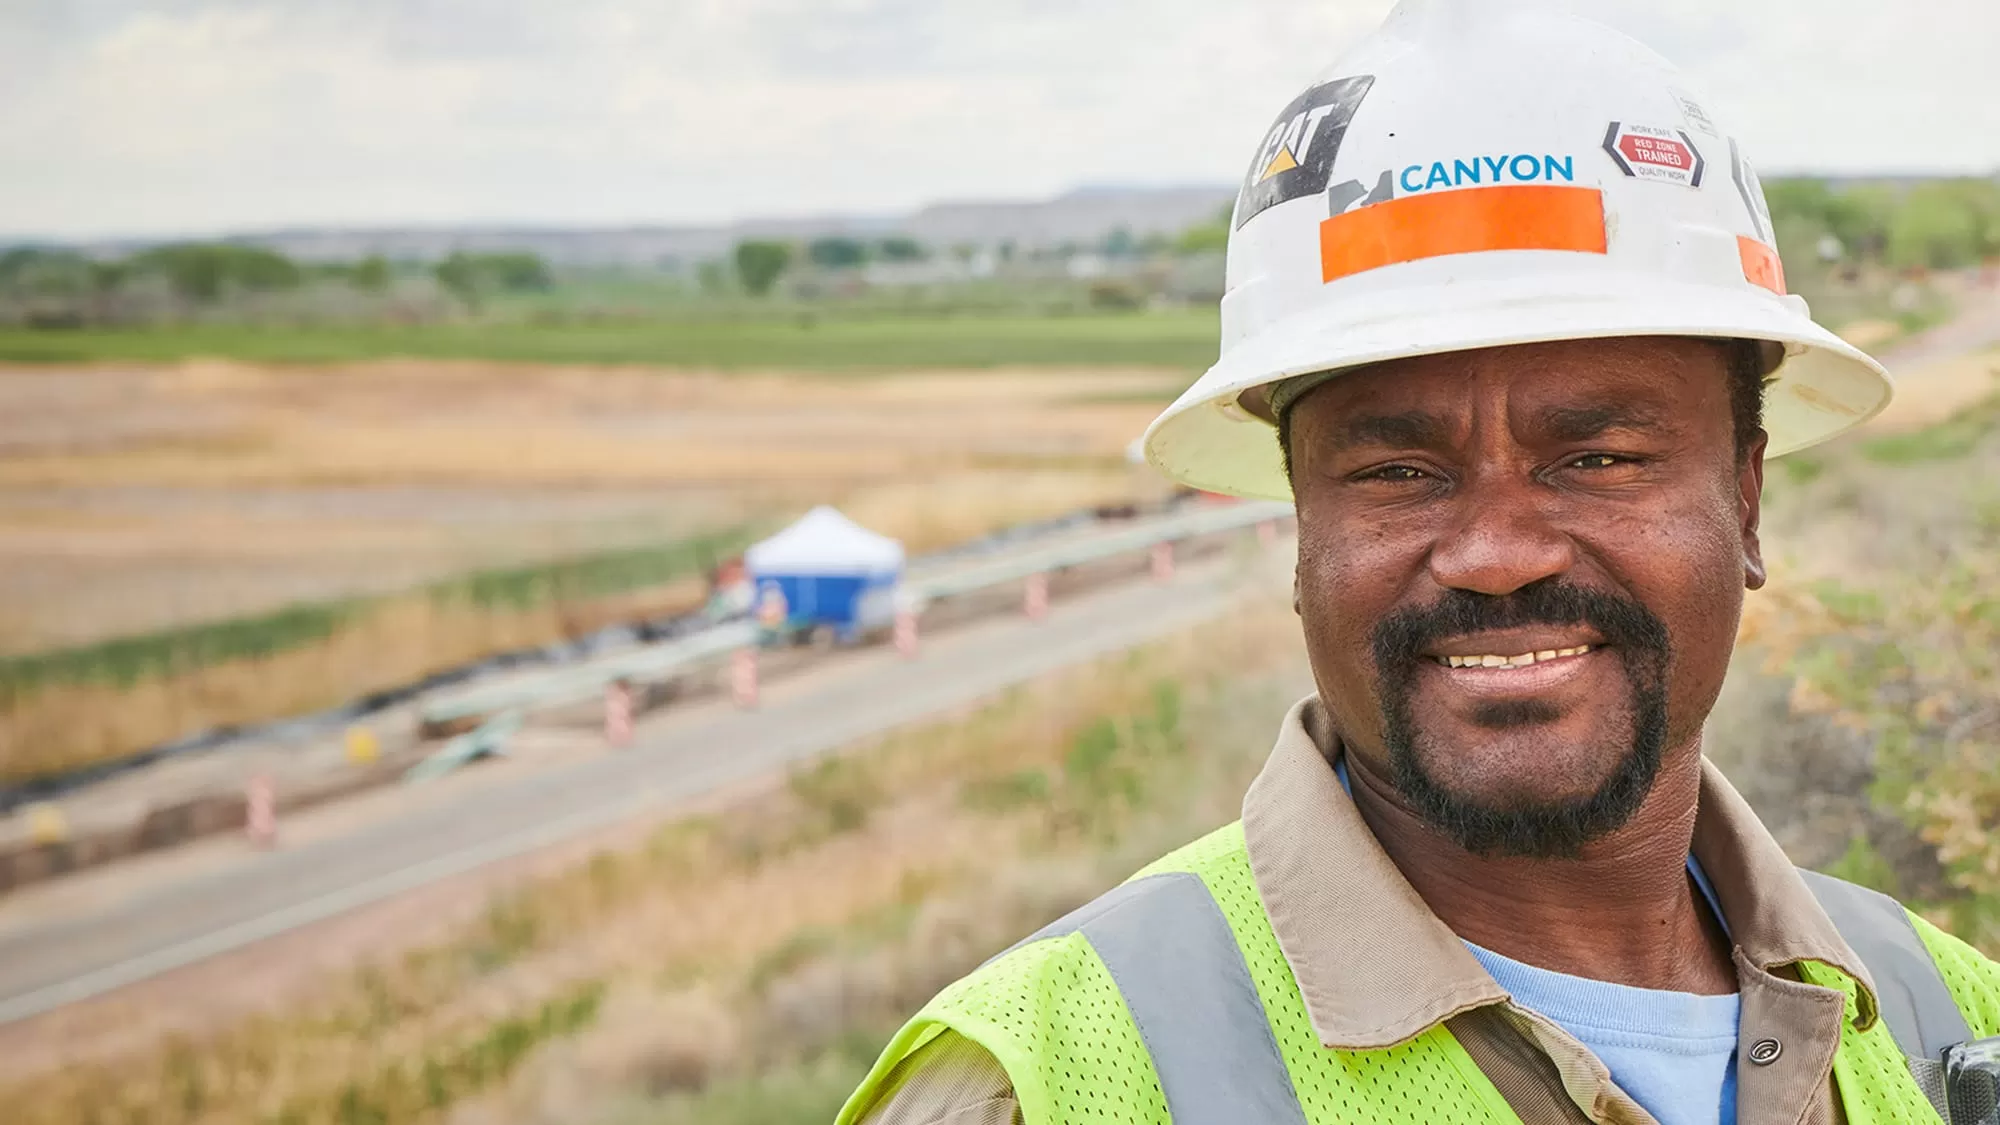 Canyon Pipeline worker smiling for the camera on a work site